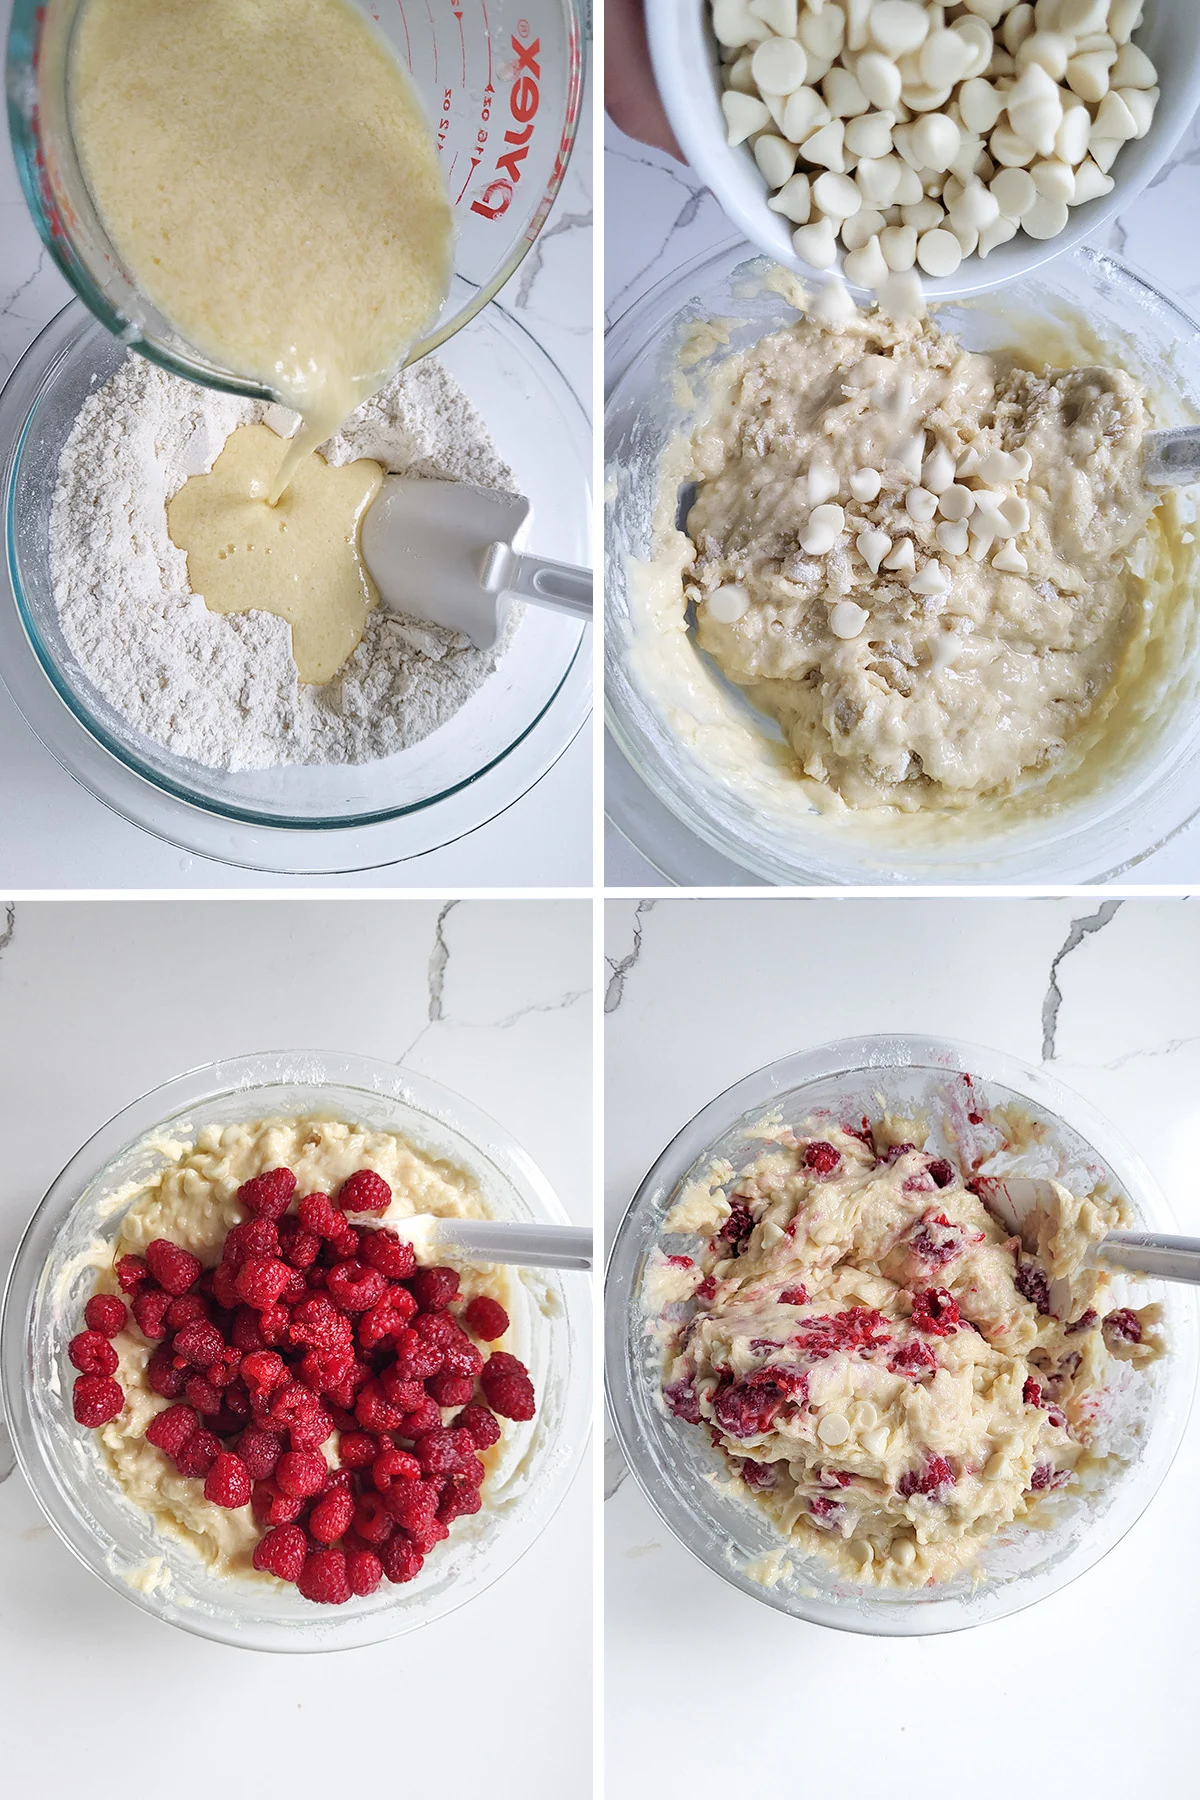 Wet ingredients poured into dry ingredients. White chocolate chips added, raspberries added. 